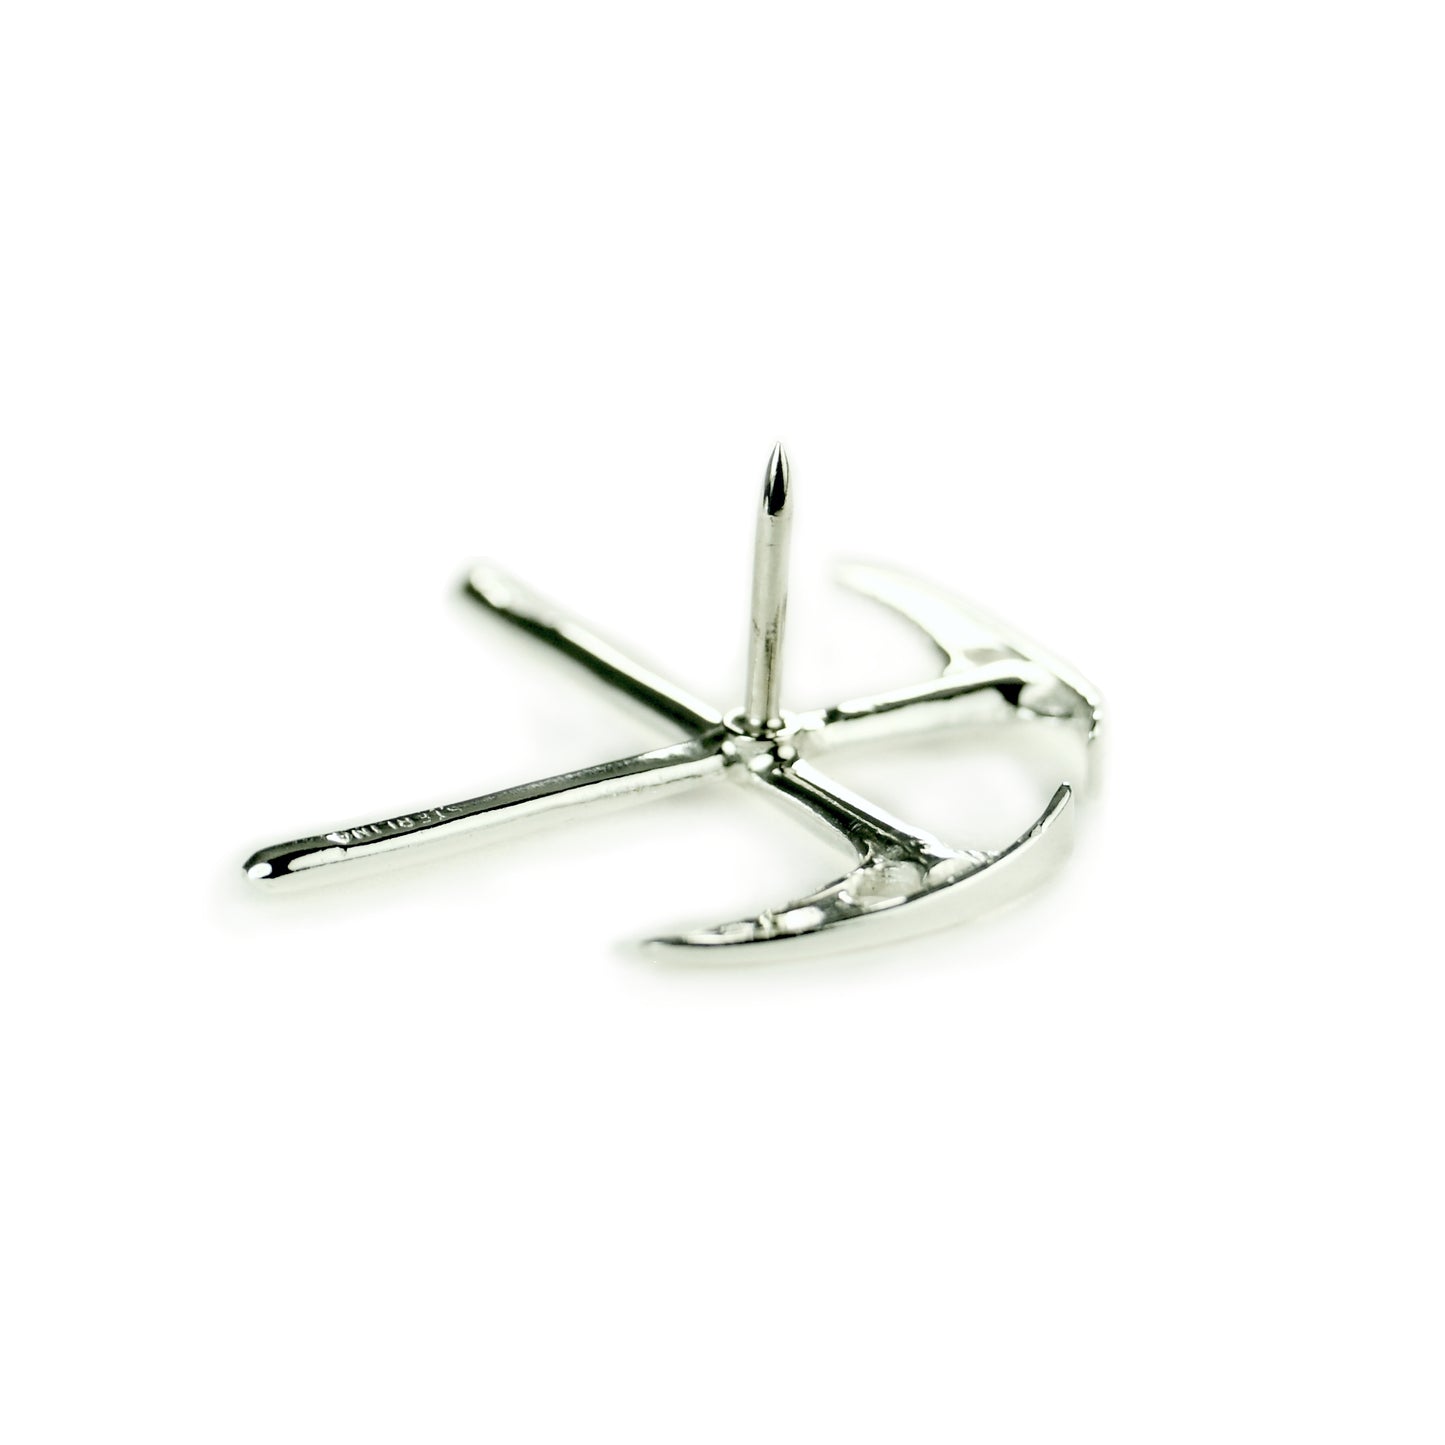 climbers crossed ice axe lapel pin sterling silver - showing pinback